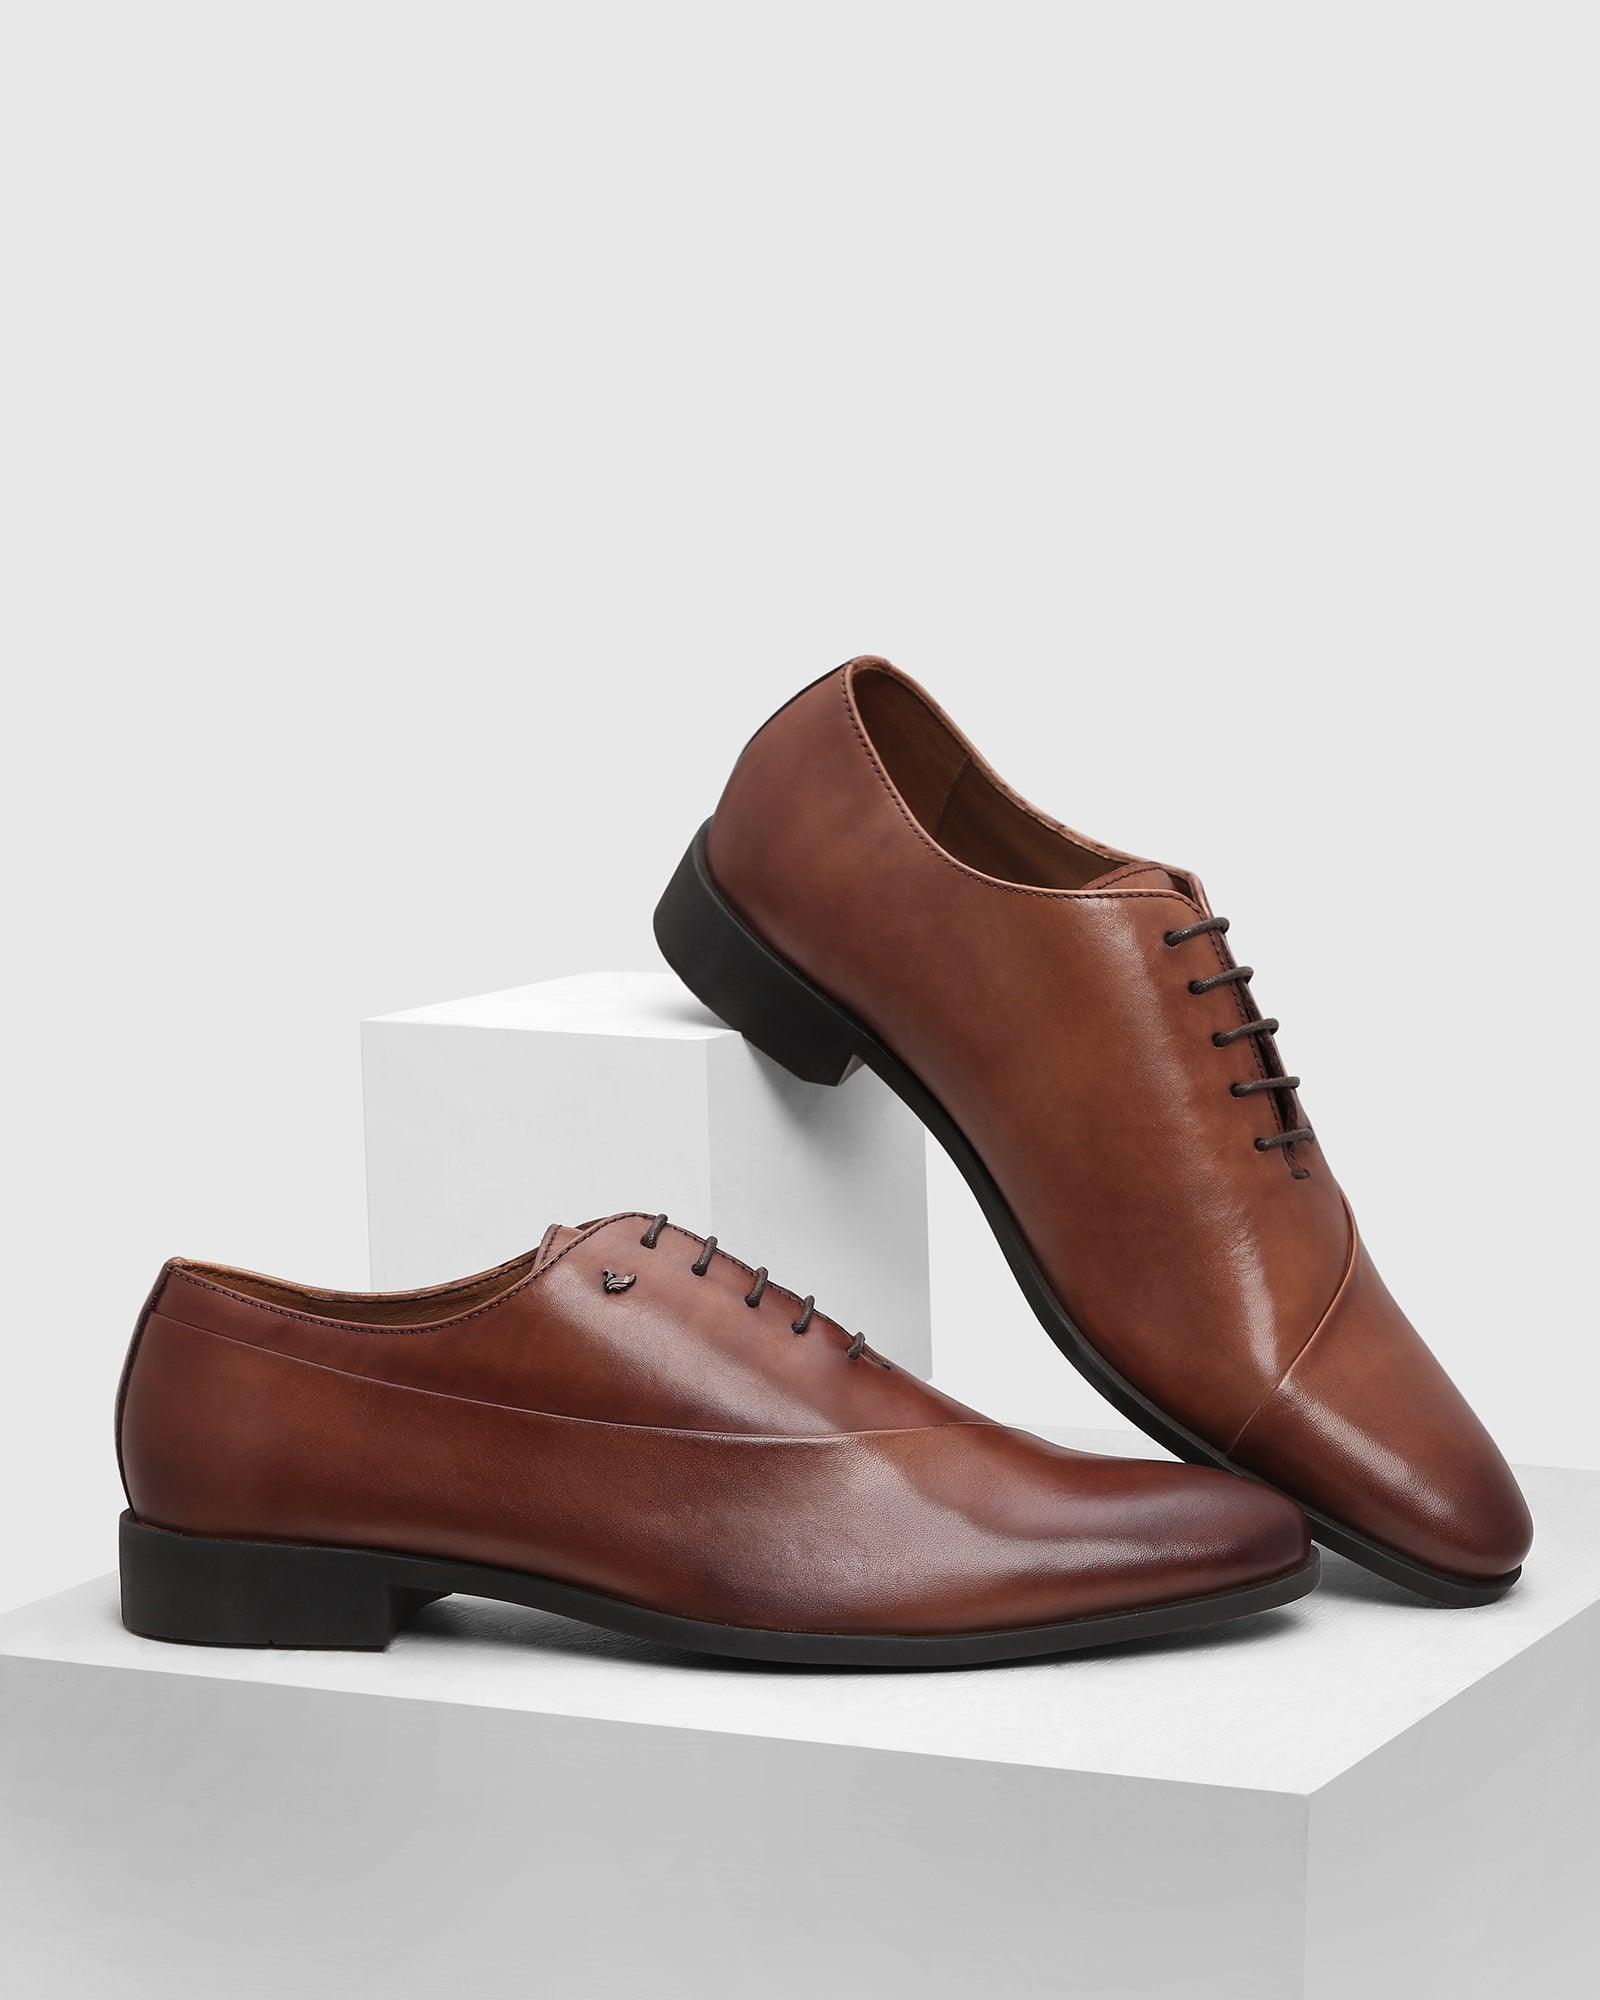 leather-formal-tan-solid-oxford-shoes---pren